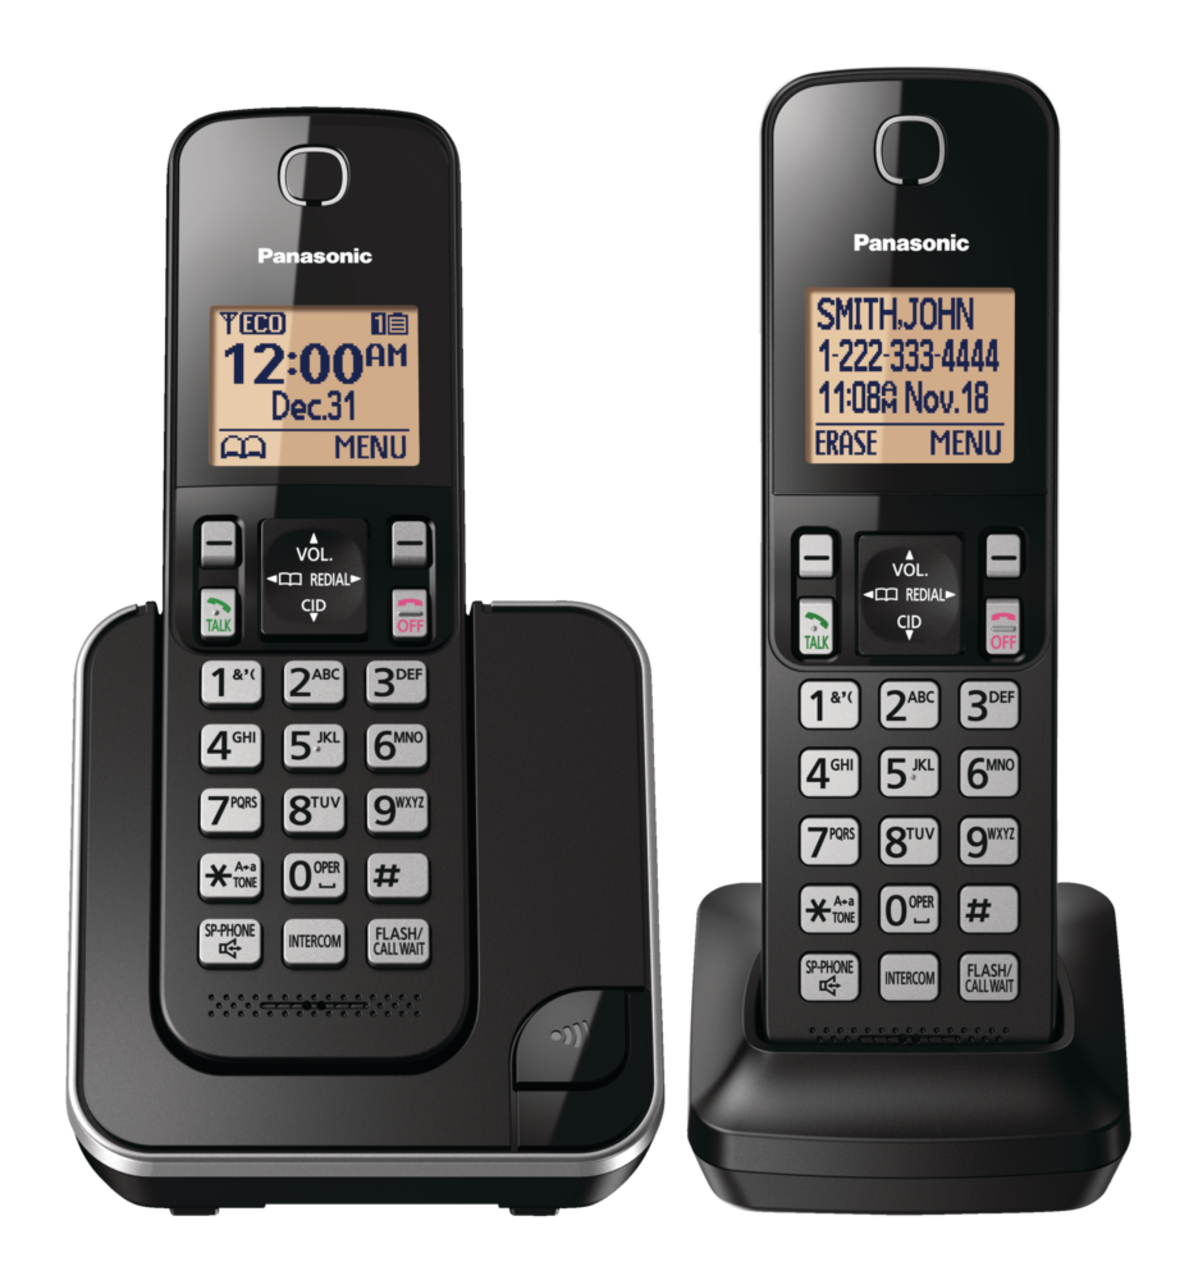 https://media-www.canadiantire.ca/product/living/electronics/home-communications/0698004/panasonic-dect-6-0-2hs-with-caller-id-c4373239-fb80-4248-bd0f-eded0178c58b.png?imdensity=1&imwidth=640&impolicy=mZoom